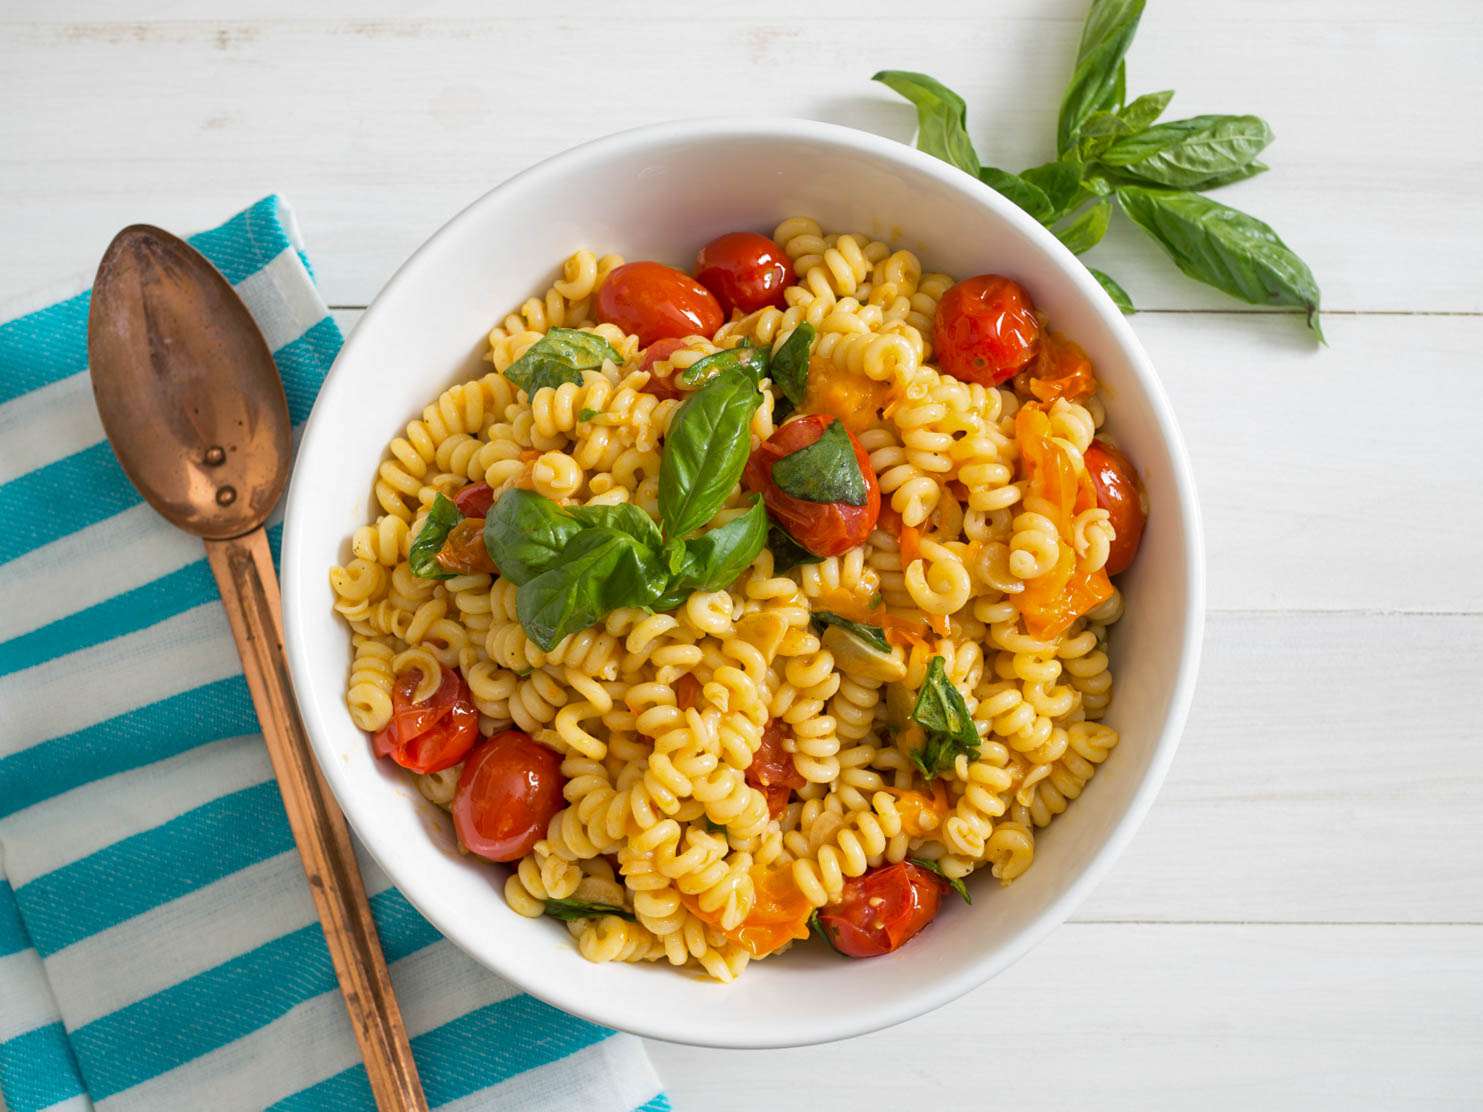 Cooked-until-bursting tomatoes make a beautiful sauce for this summery pasta salad.